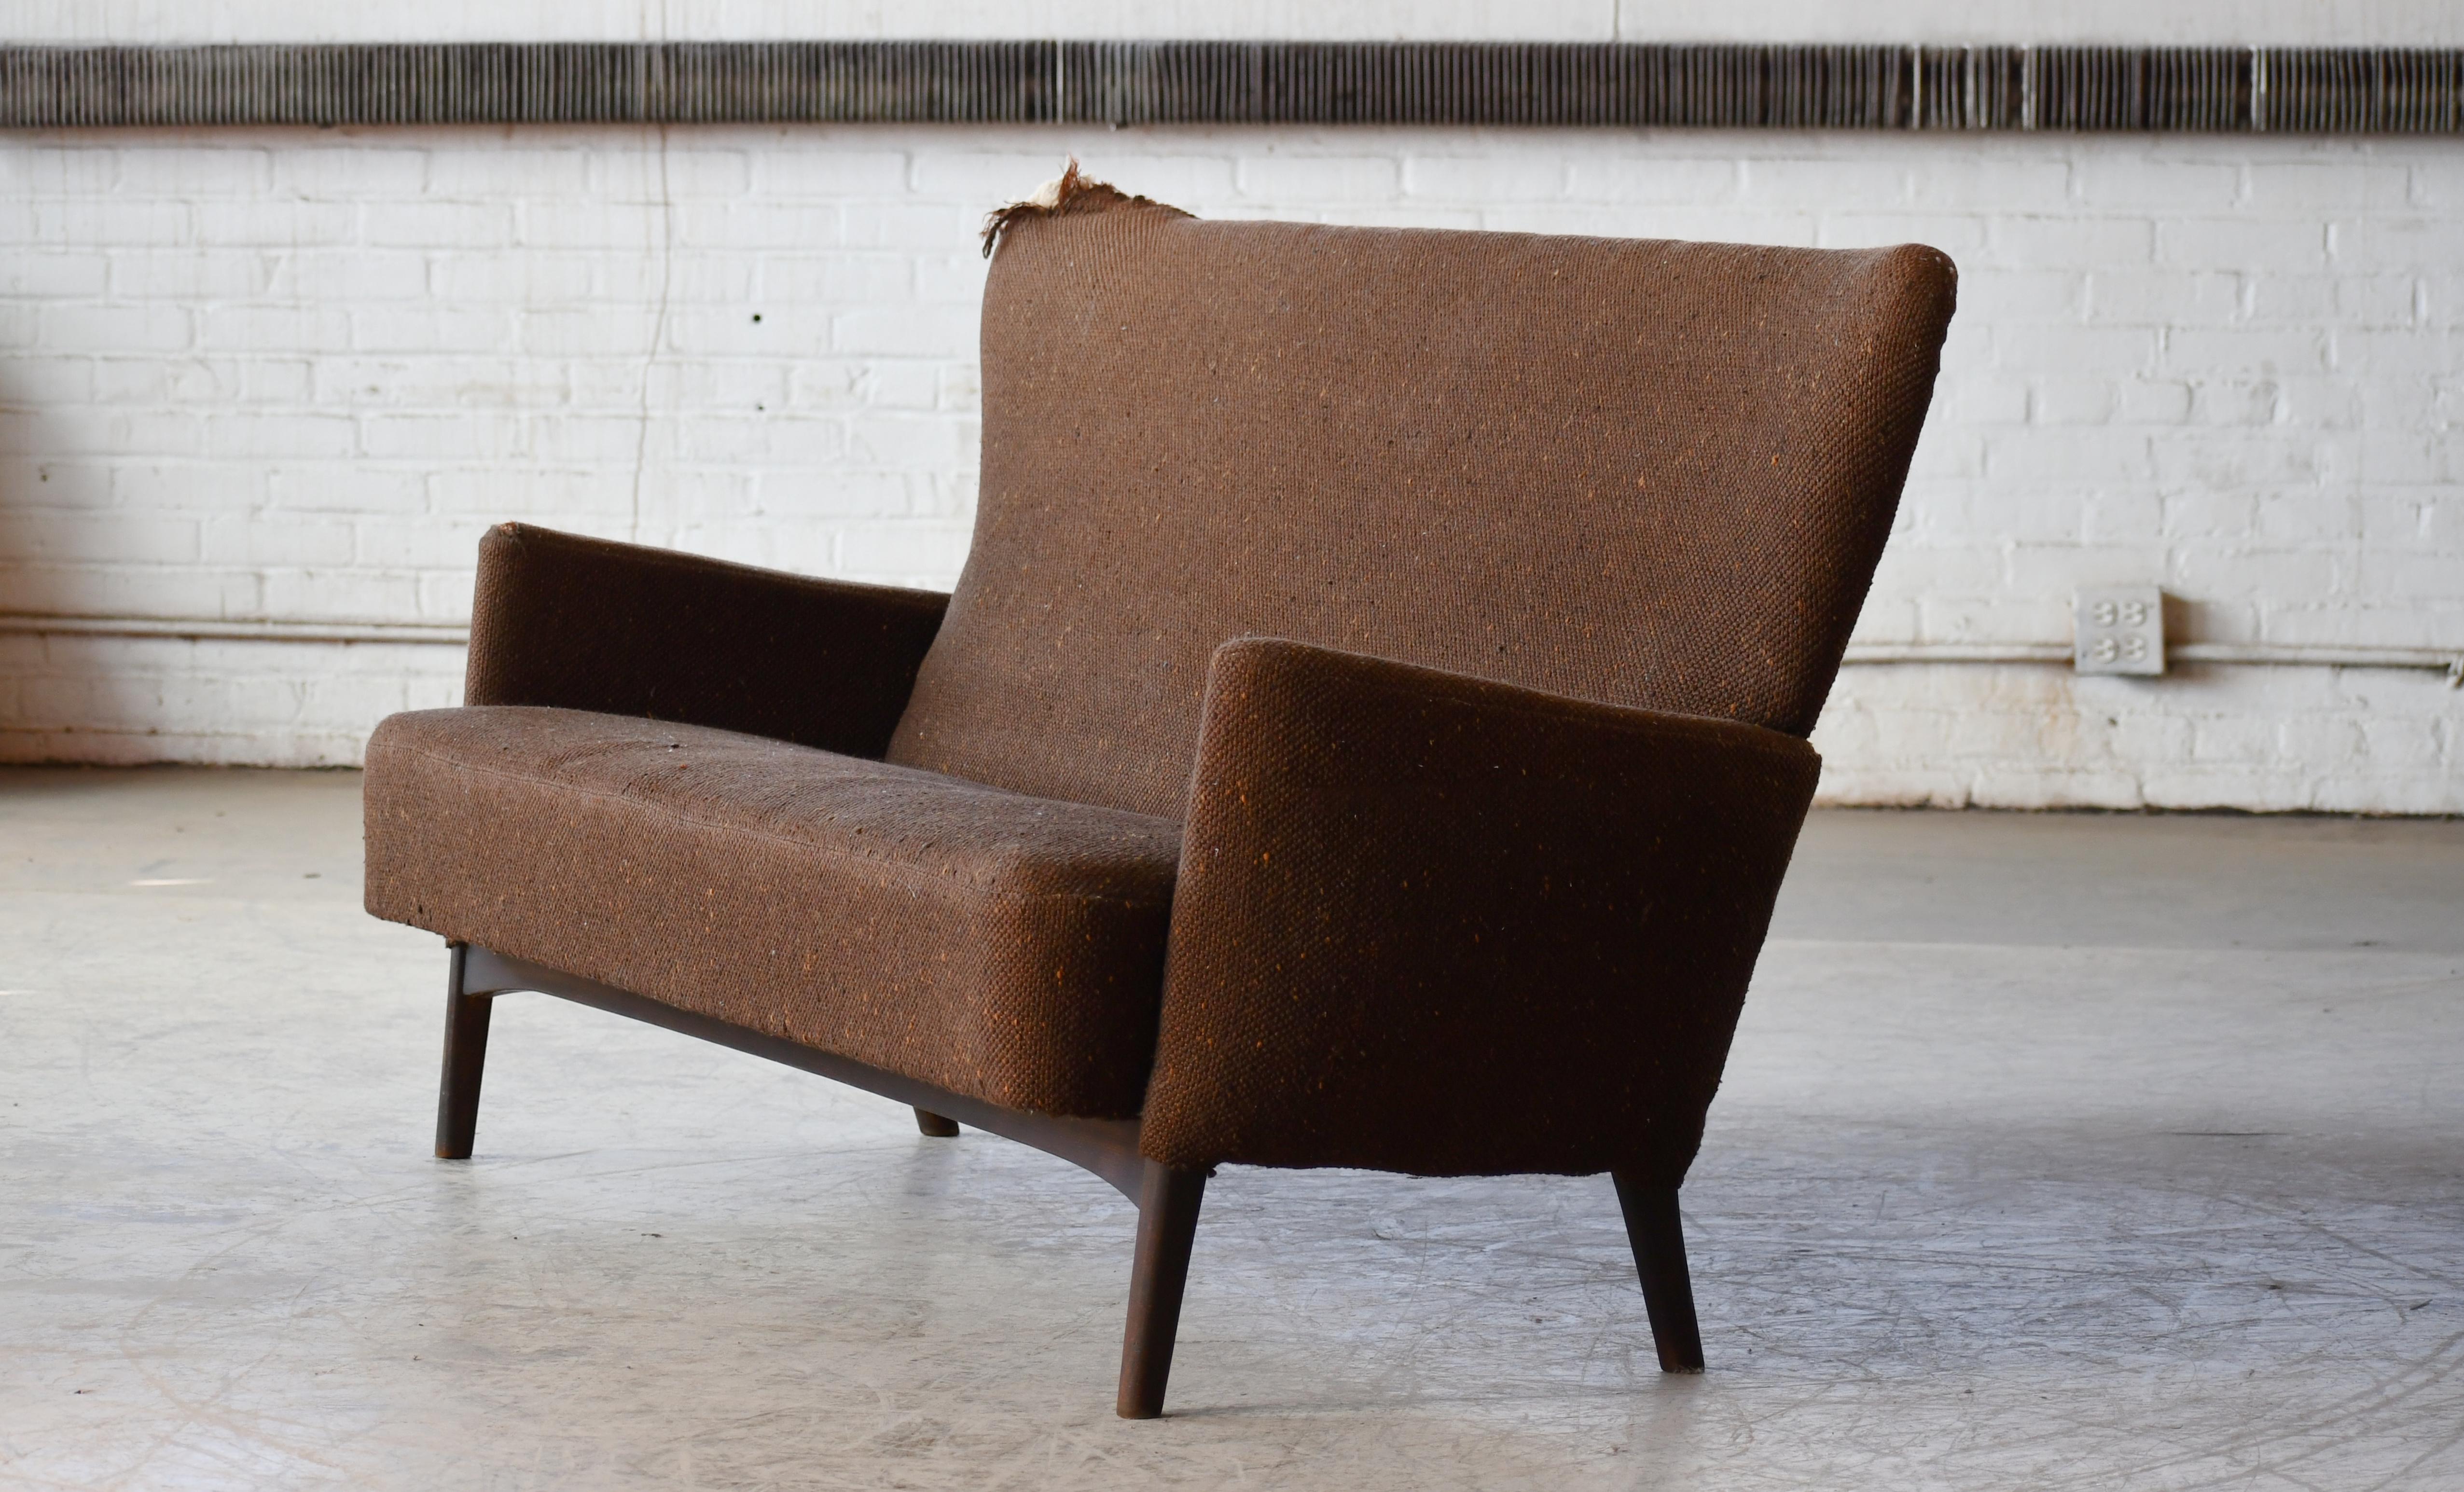 Very charming and very elegant small settee made in Denmark around mid 1950's by Fritz Hansen. It's similar but a bit more linear and modern than his well-know model 8112. Solid and sturdy with coil springs in the seat. Overall very good condition.